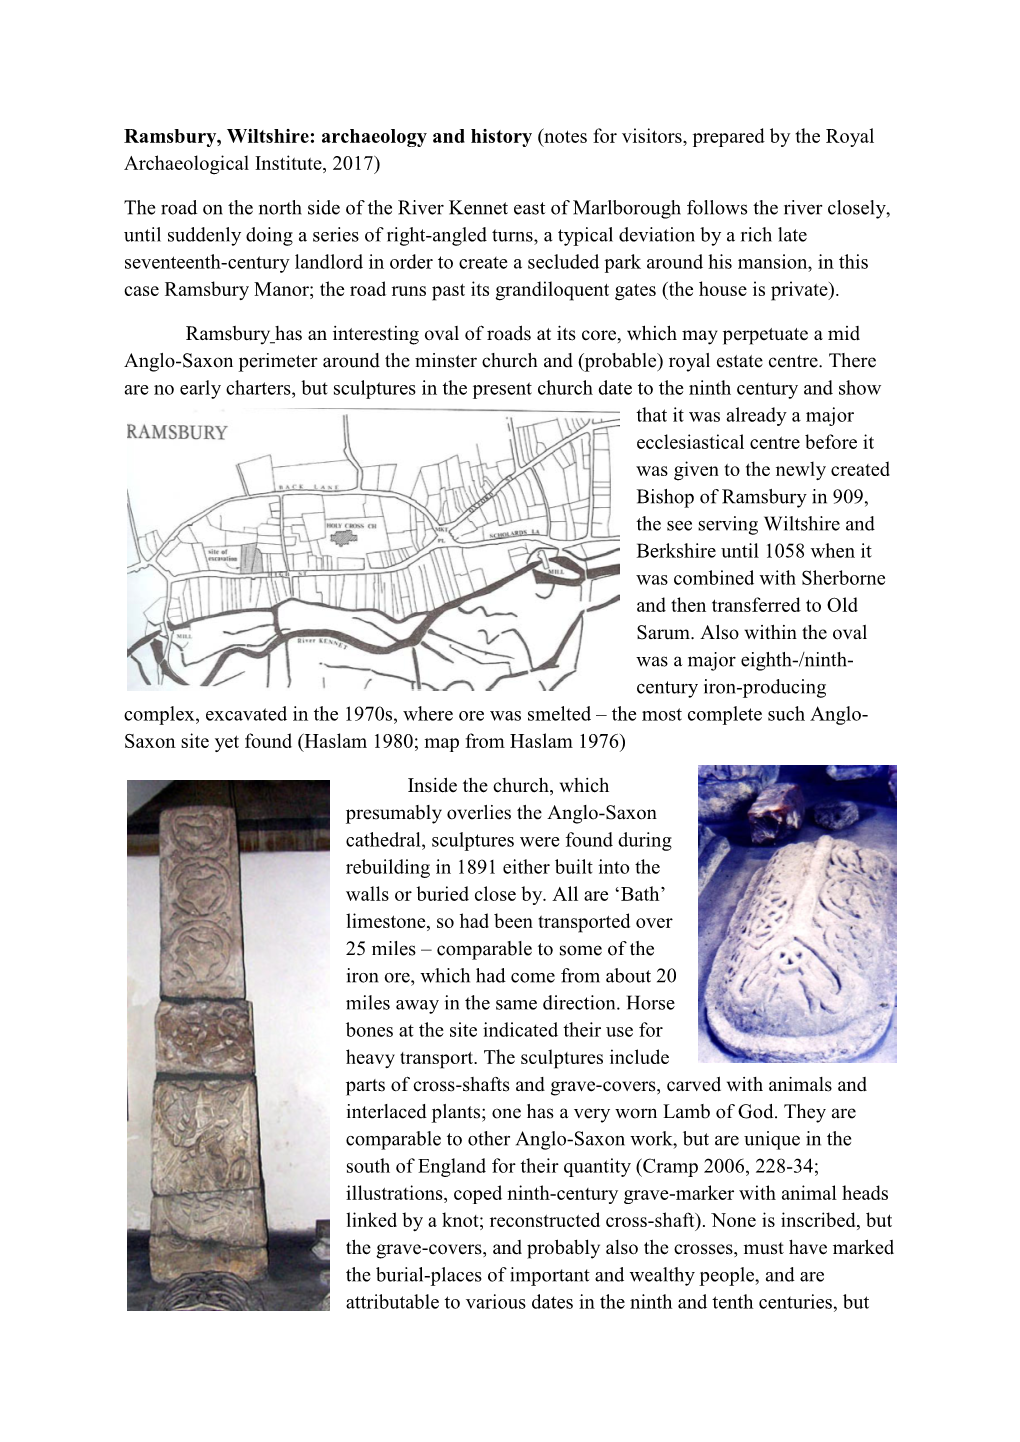 Ramsbury, Wiltshire: Archaeology and History (Notes for Visitors, Prepared by the Royal Archaeological Institute, 2017)